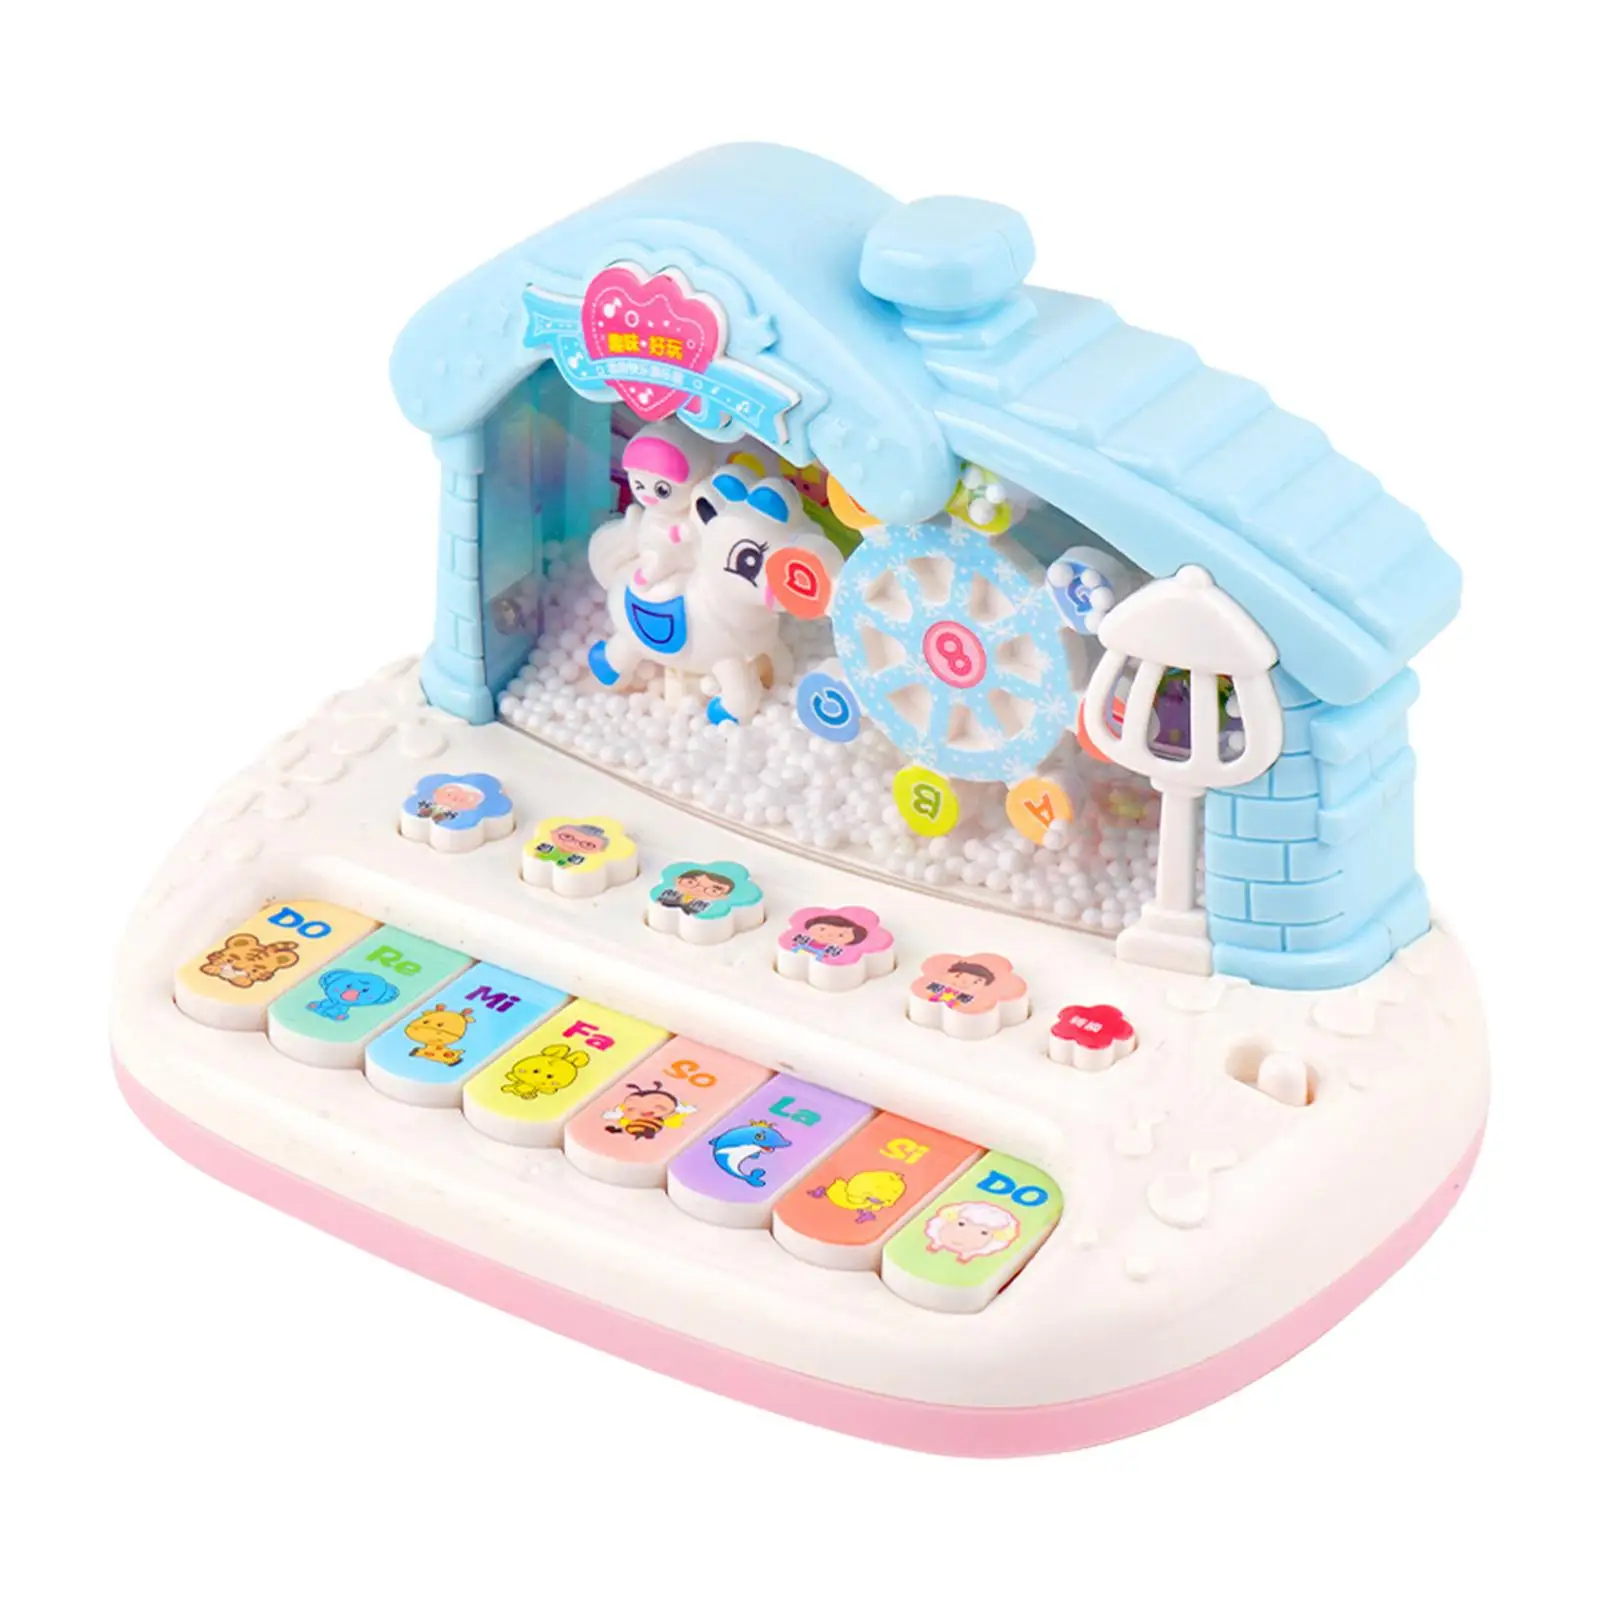 Electric Keyboard Children Piano Toy for 1 2 3 Year Old Boys Girls Kids